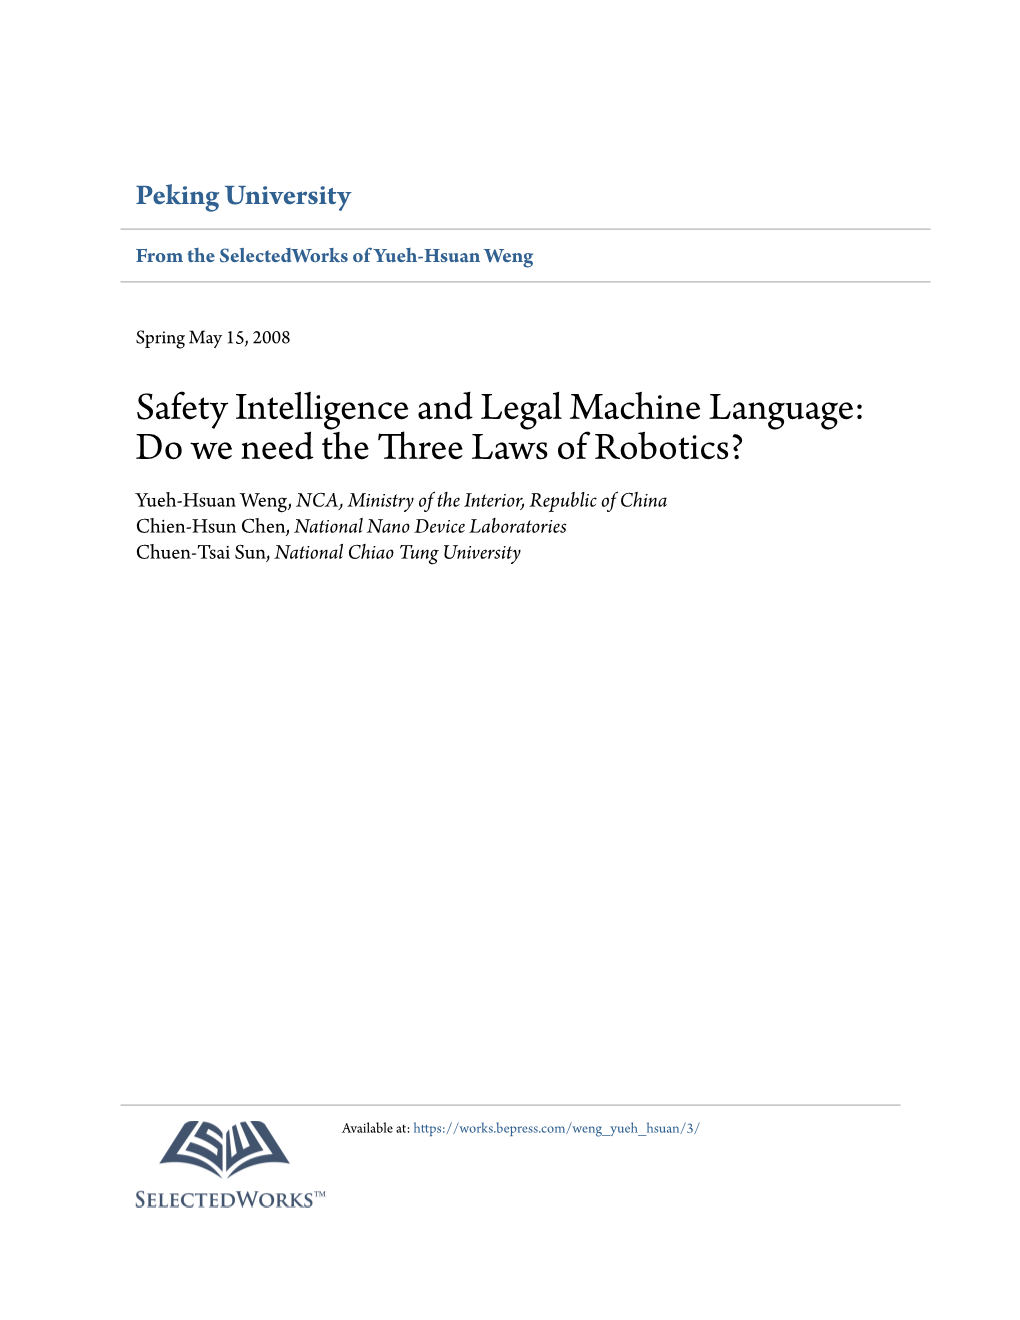 Safety Intelligence and Legal Machine Language: Do We Need the Three Laws of Robotics?